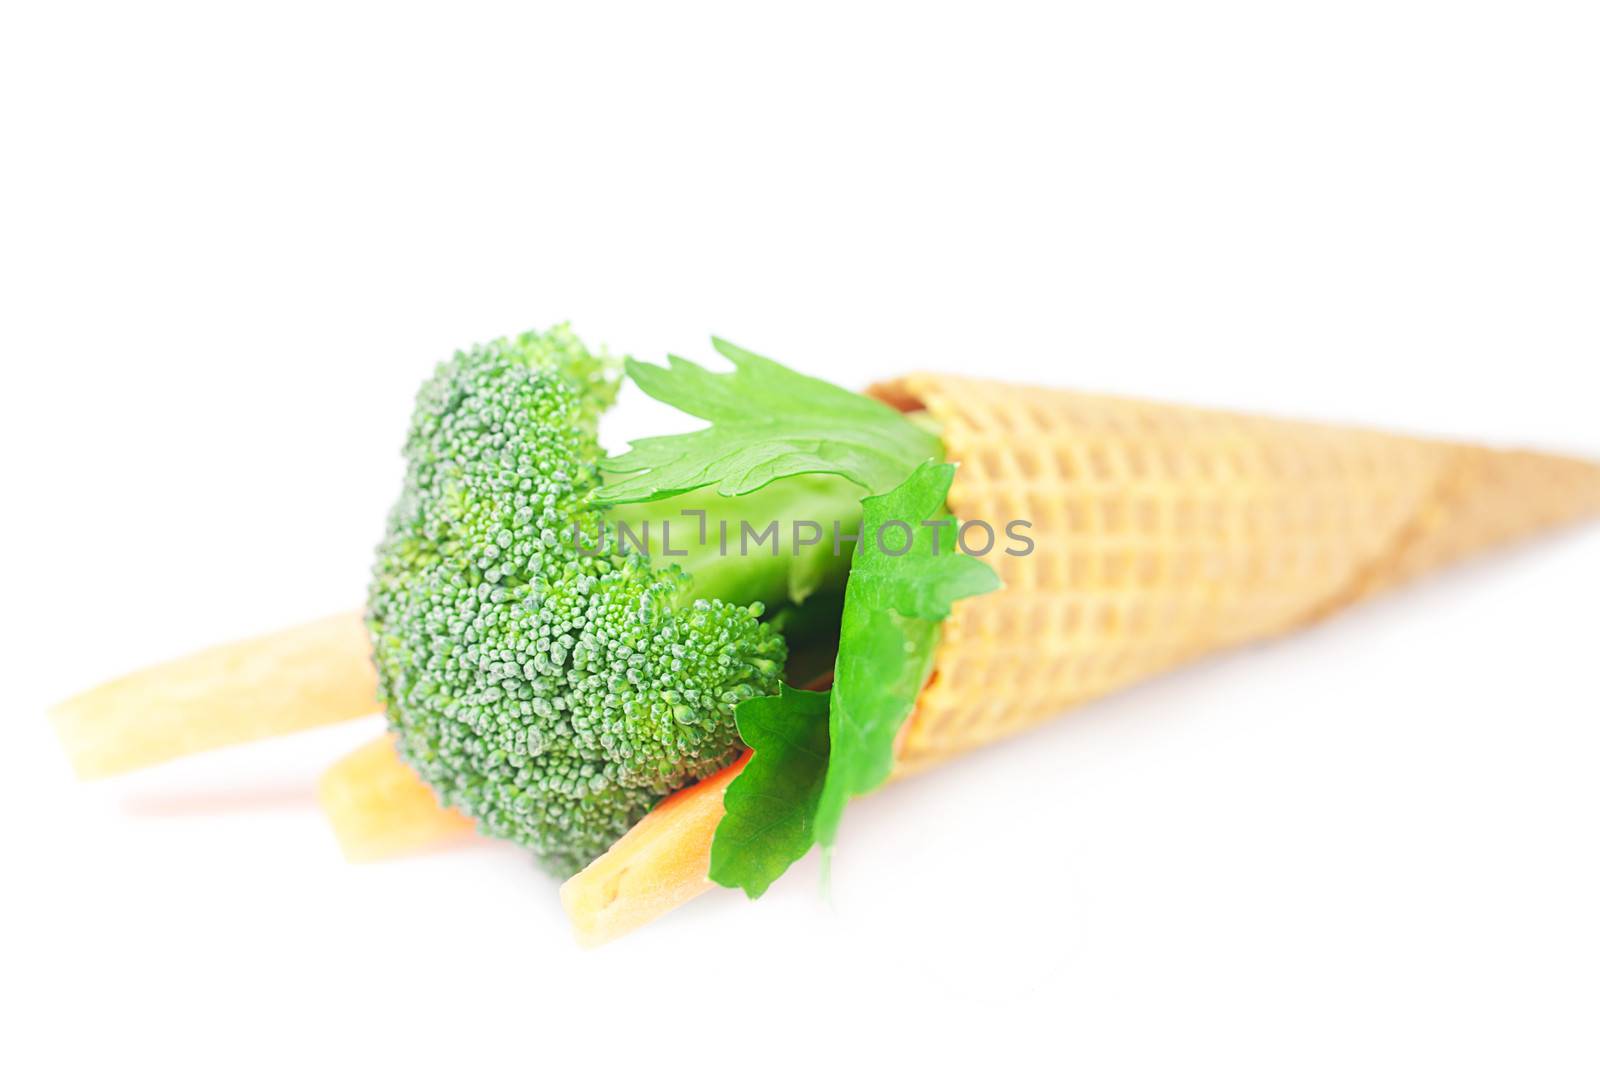 carrot, celery, broccoli in a waffle cone isolated on white by jannyjus